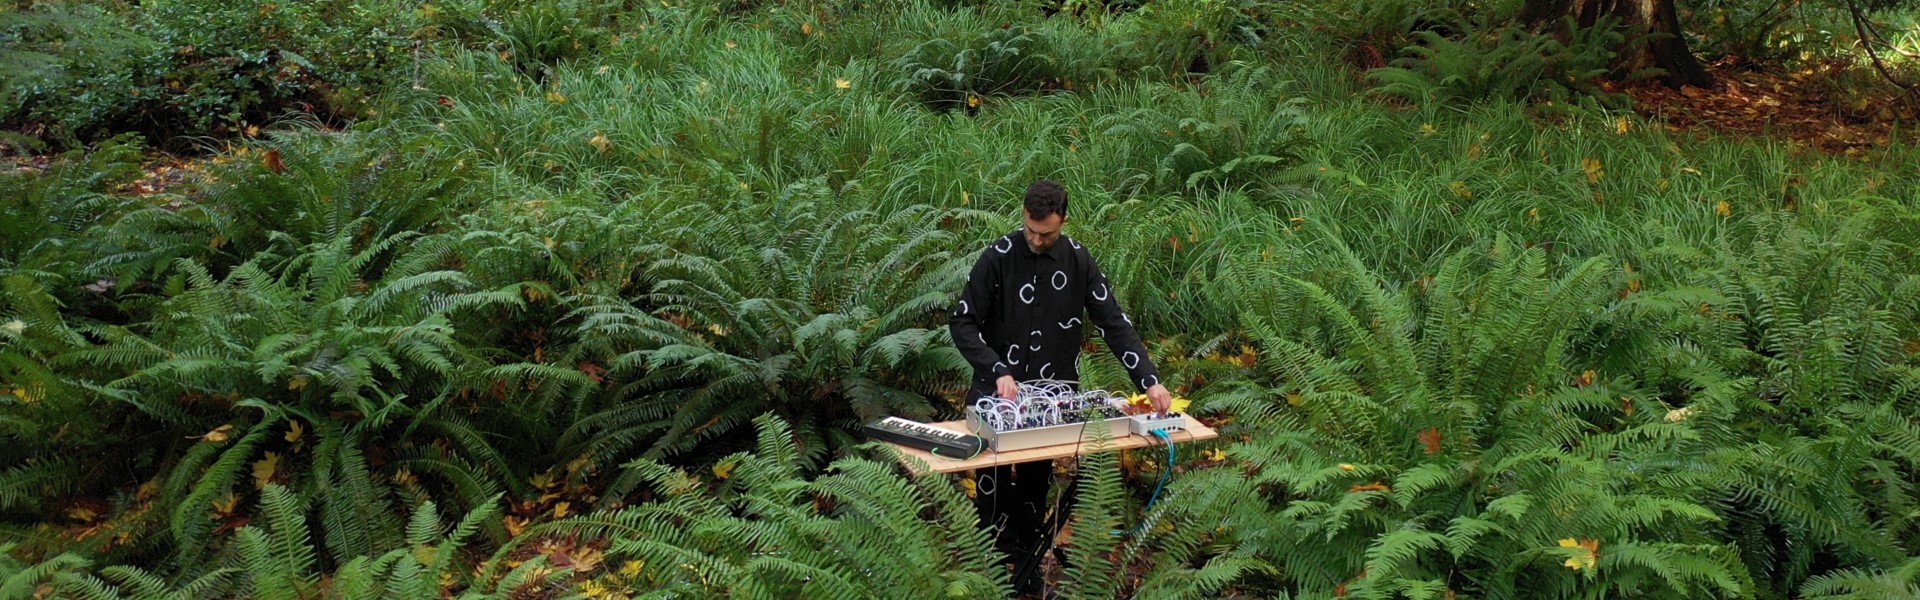 Man with music sound board records music while standing in a field of lush green ferns on Salt Spring Island.